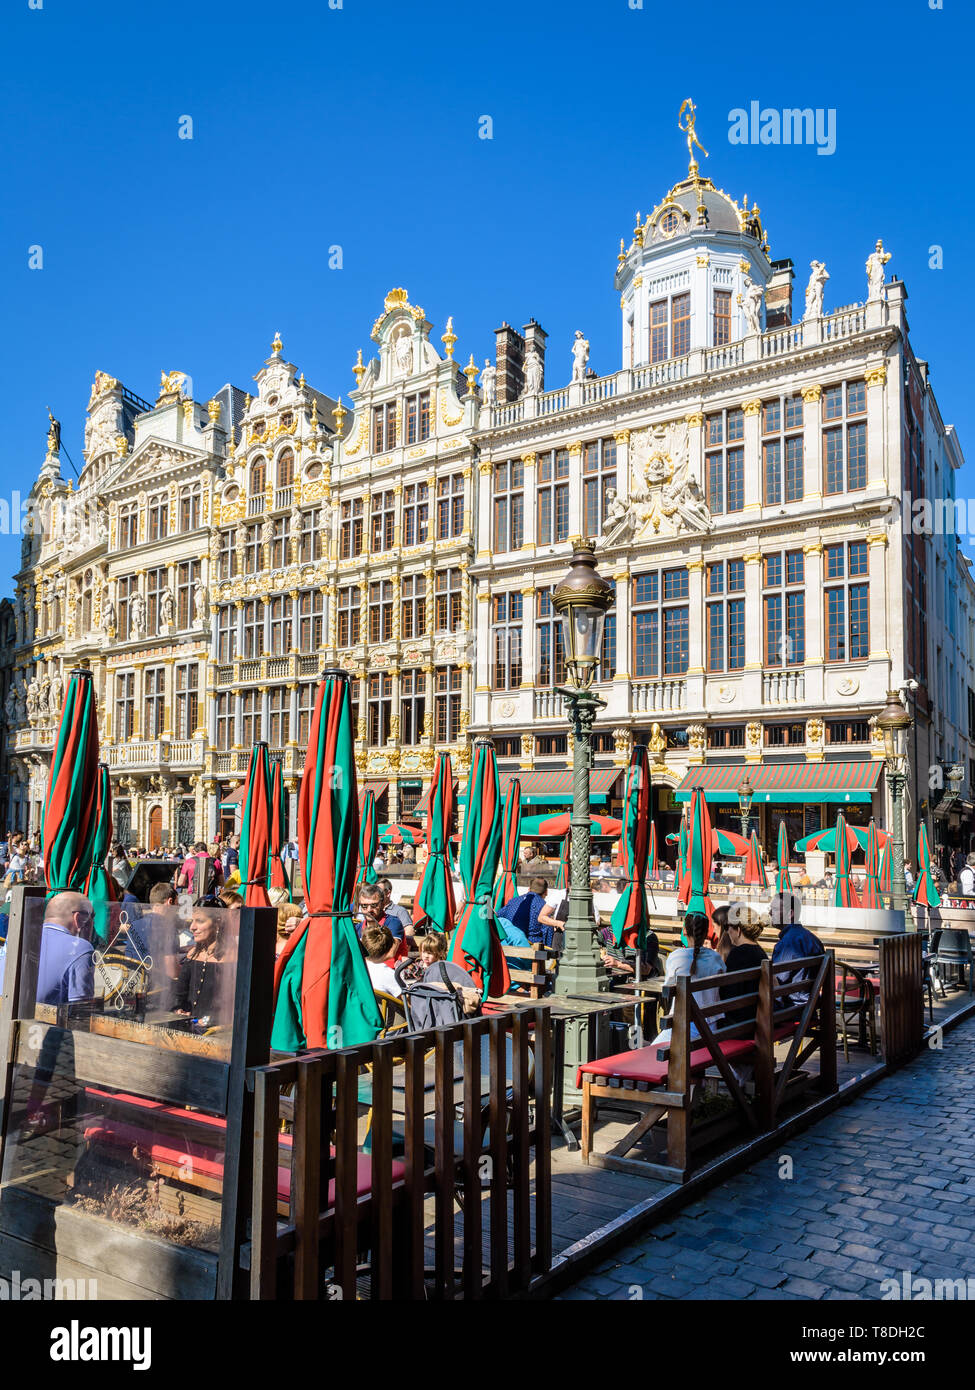 The Grand Place in Brussels, Belgium, is lined by opulent guild houses, with richly decorated facades, and by terraces of cafes and restaurants. Stock Photo